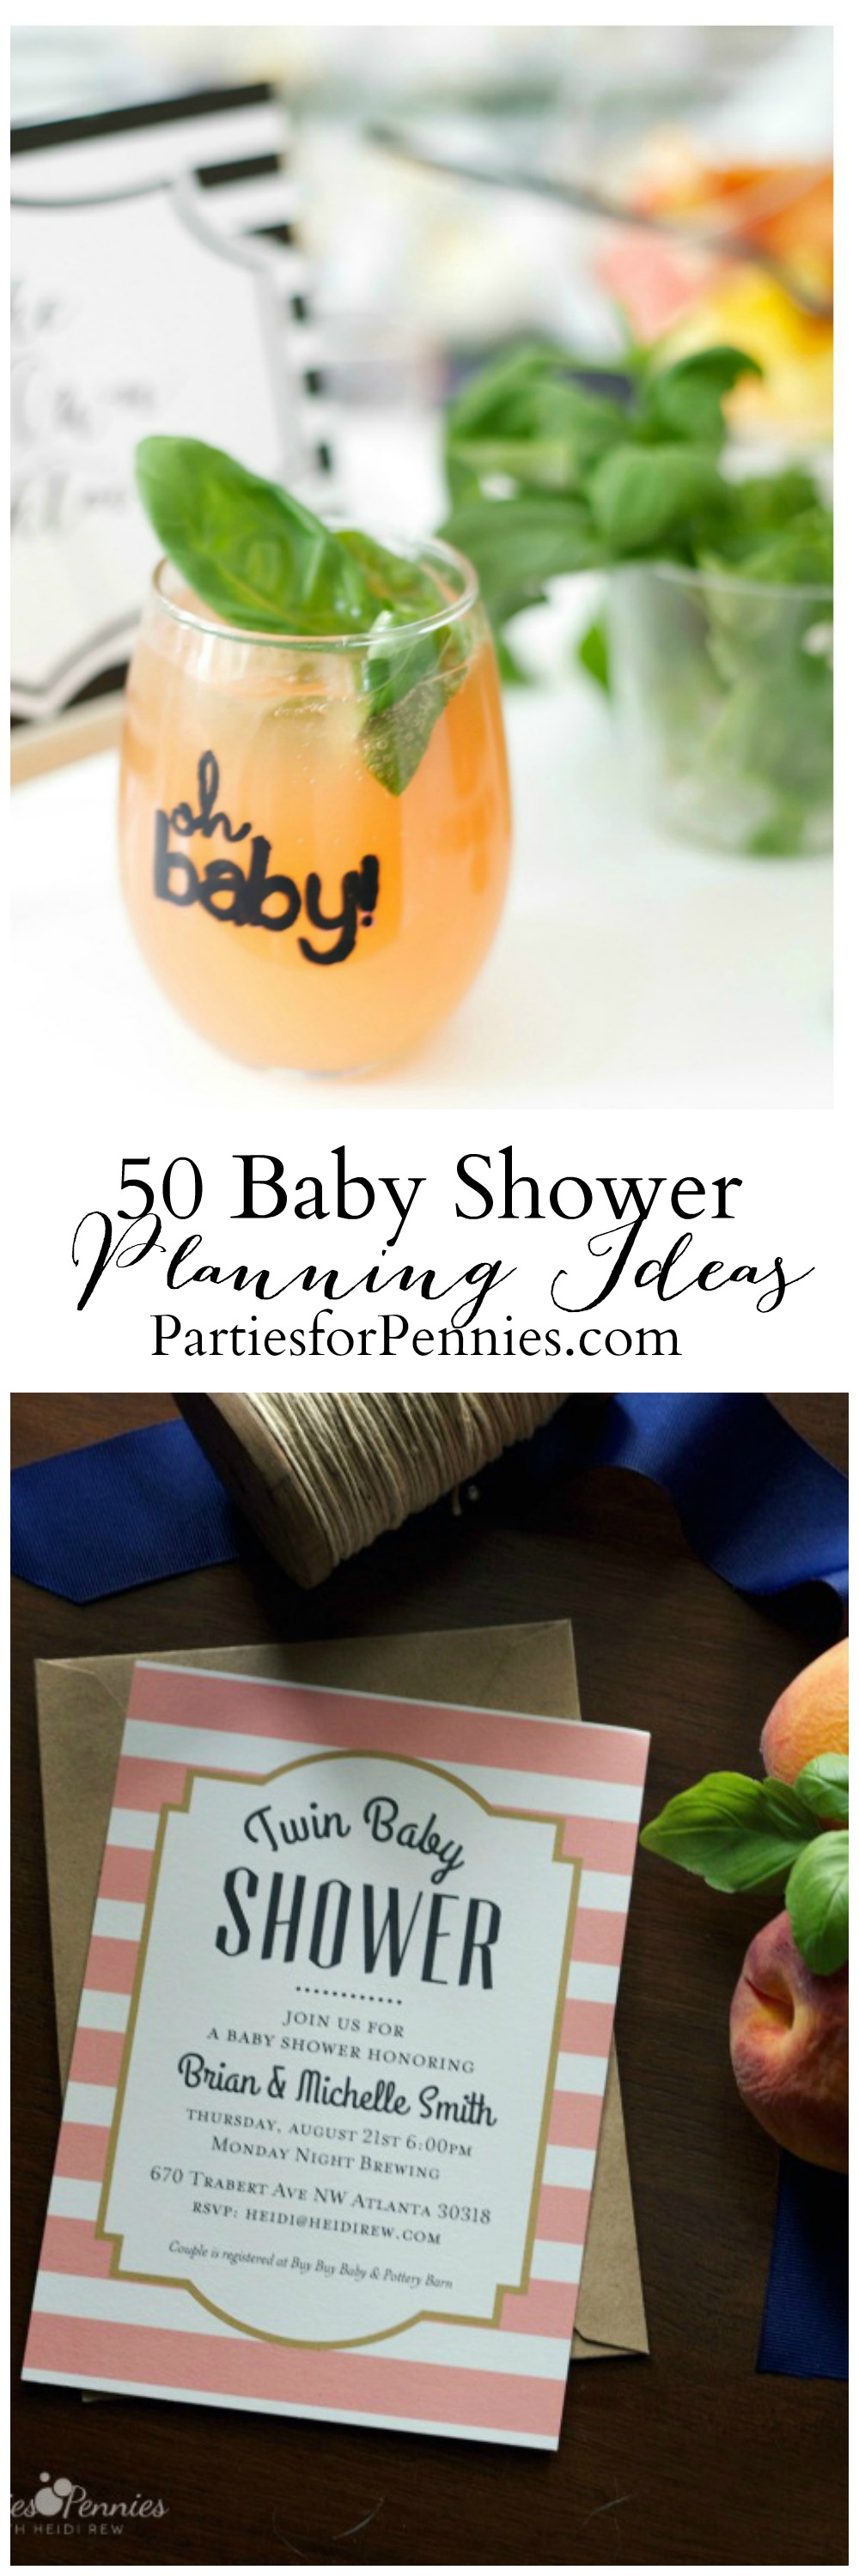 50 Ideas for Planning a Baby Shower | PartiesforPennies.com